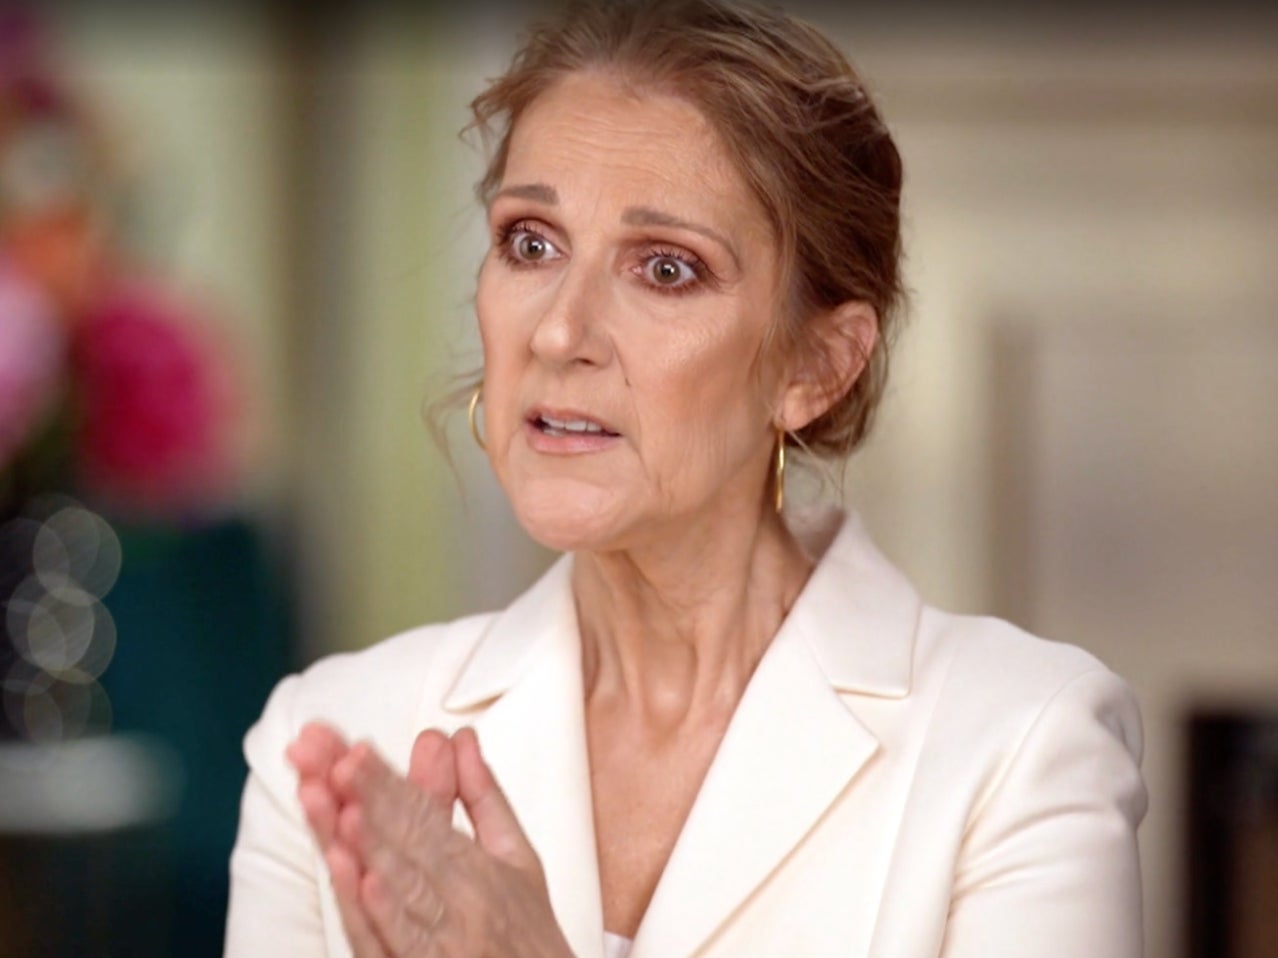 Celine Dion says she couldn’t stand to lie about her condition any longer